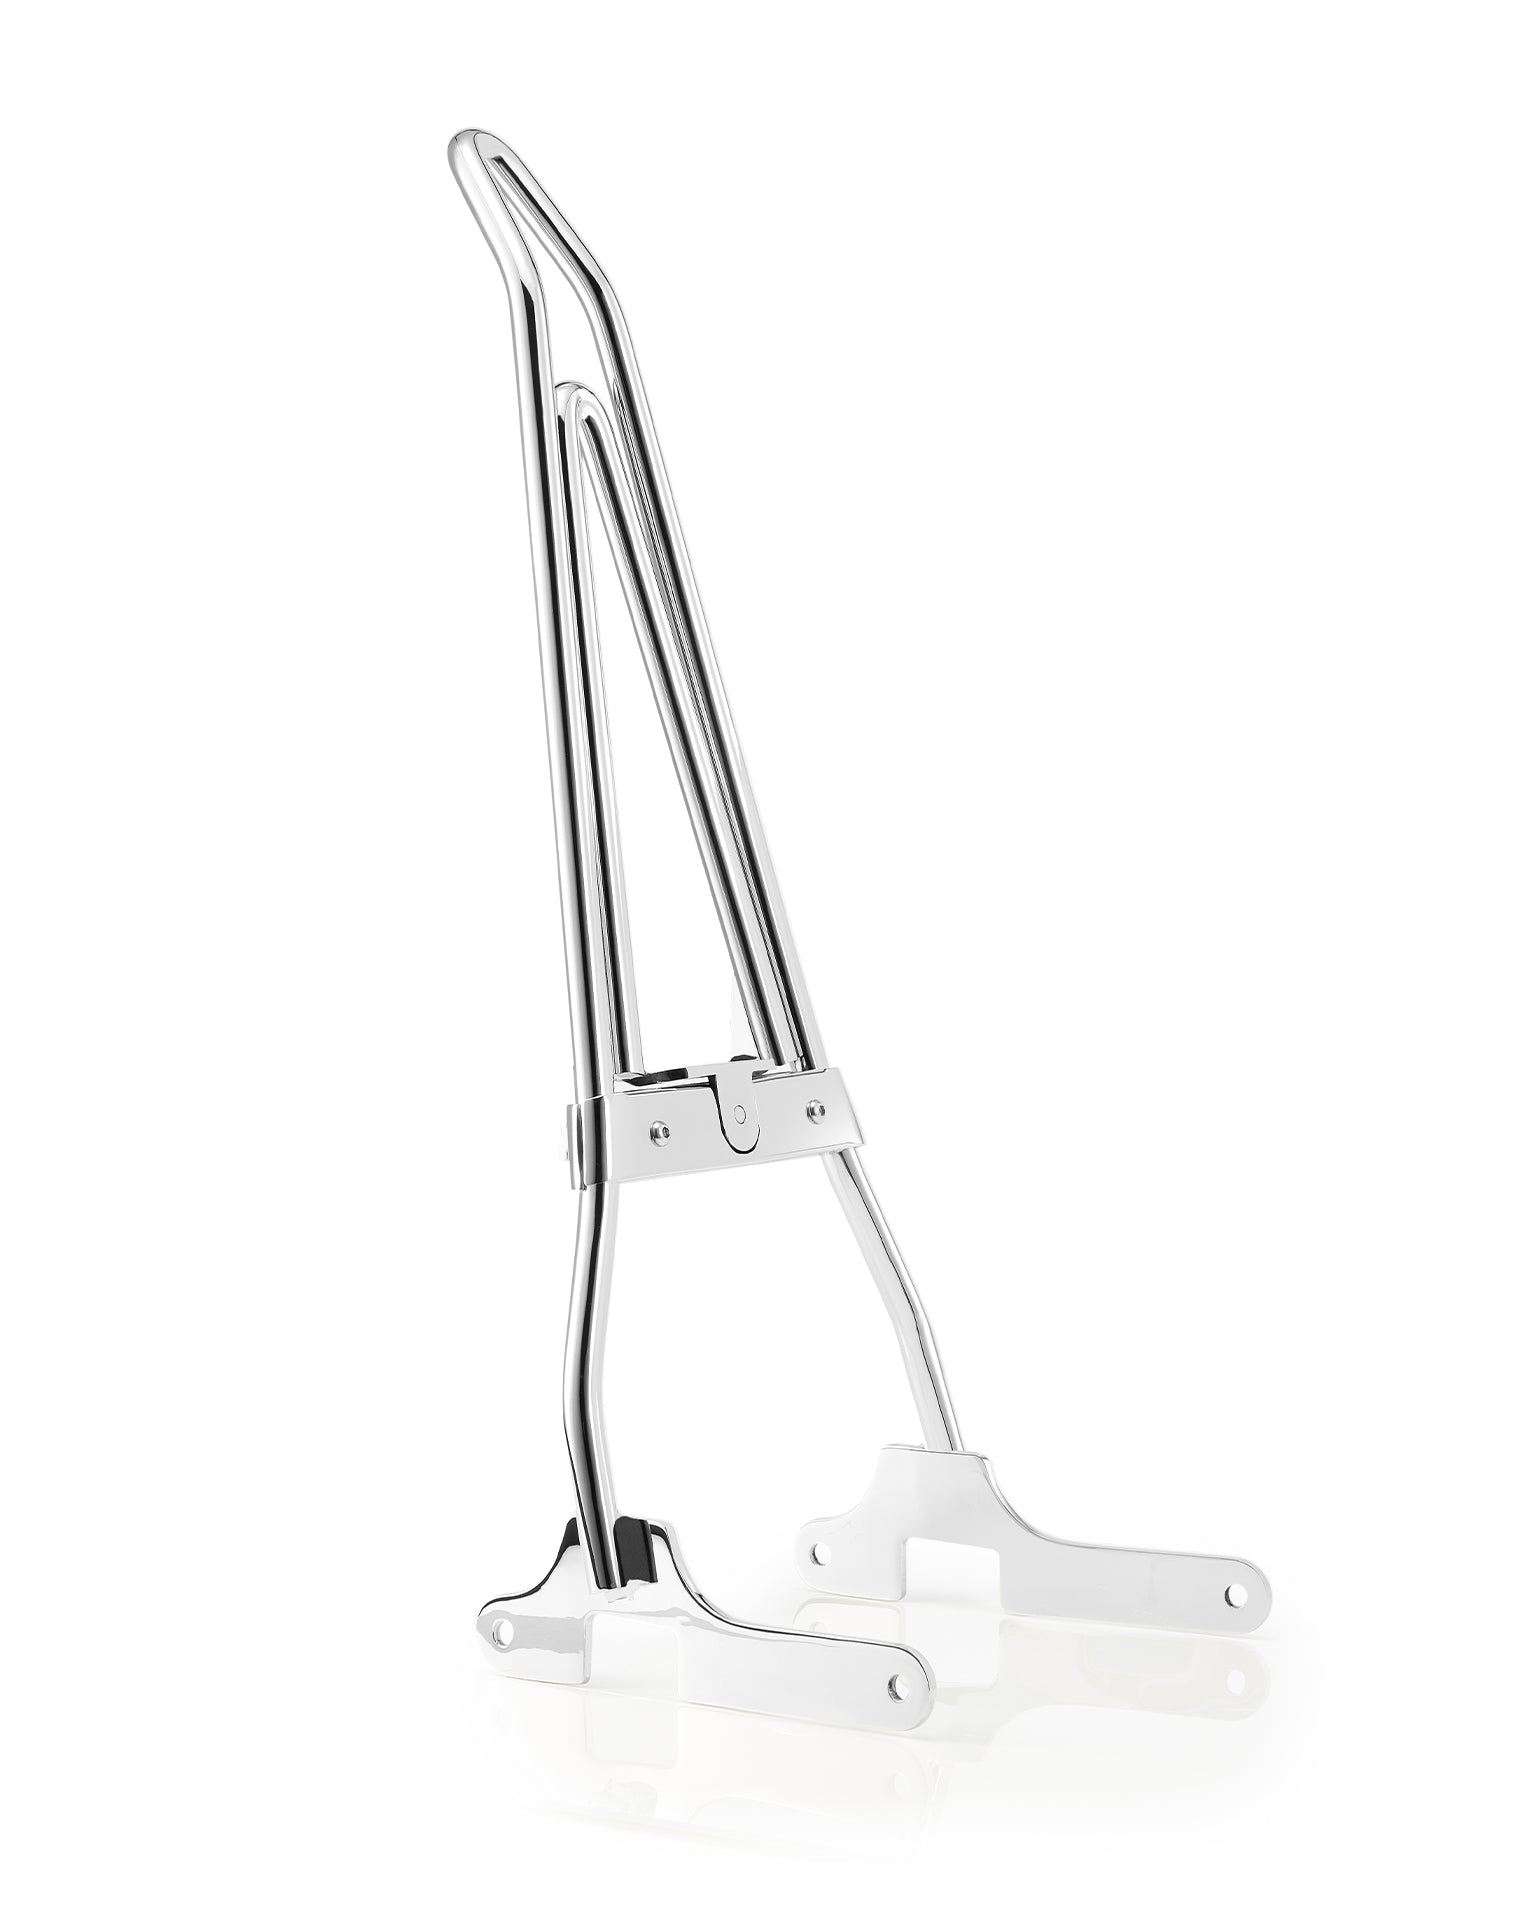 Iron Born Blade 25" Sissy Bar with Foldable Luggage Rack for Harley Sportster 1200 Nightster XL1200N Chrome Main view